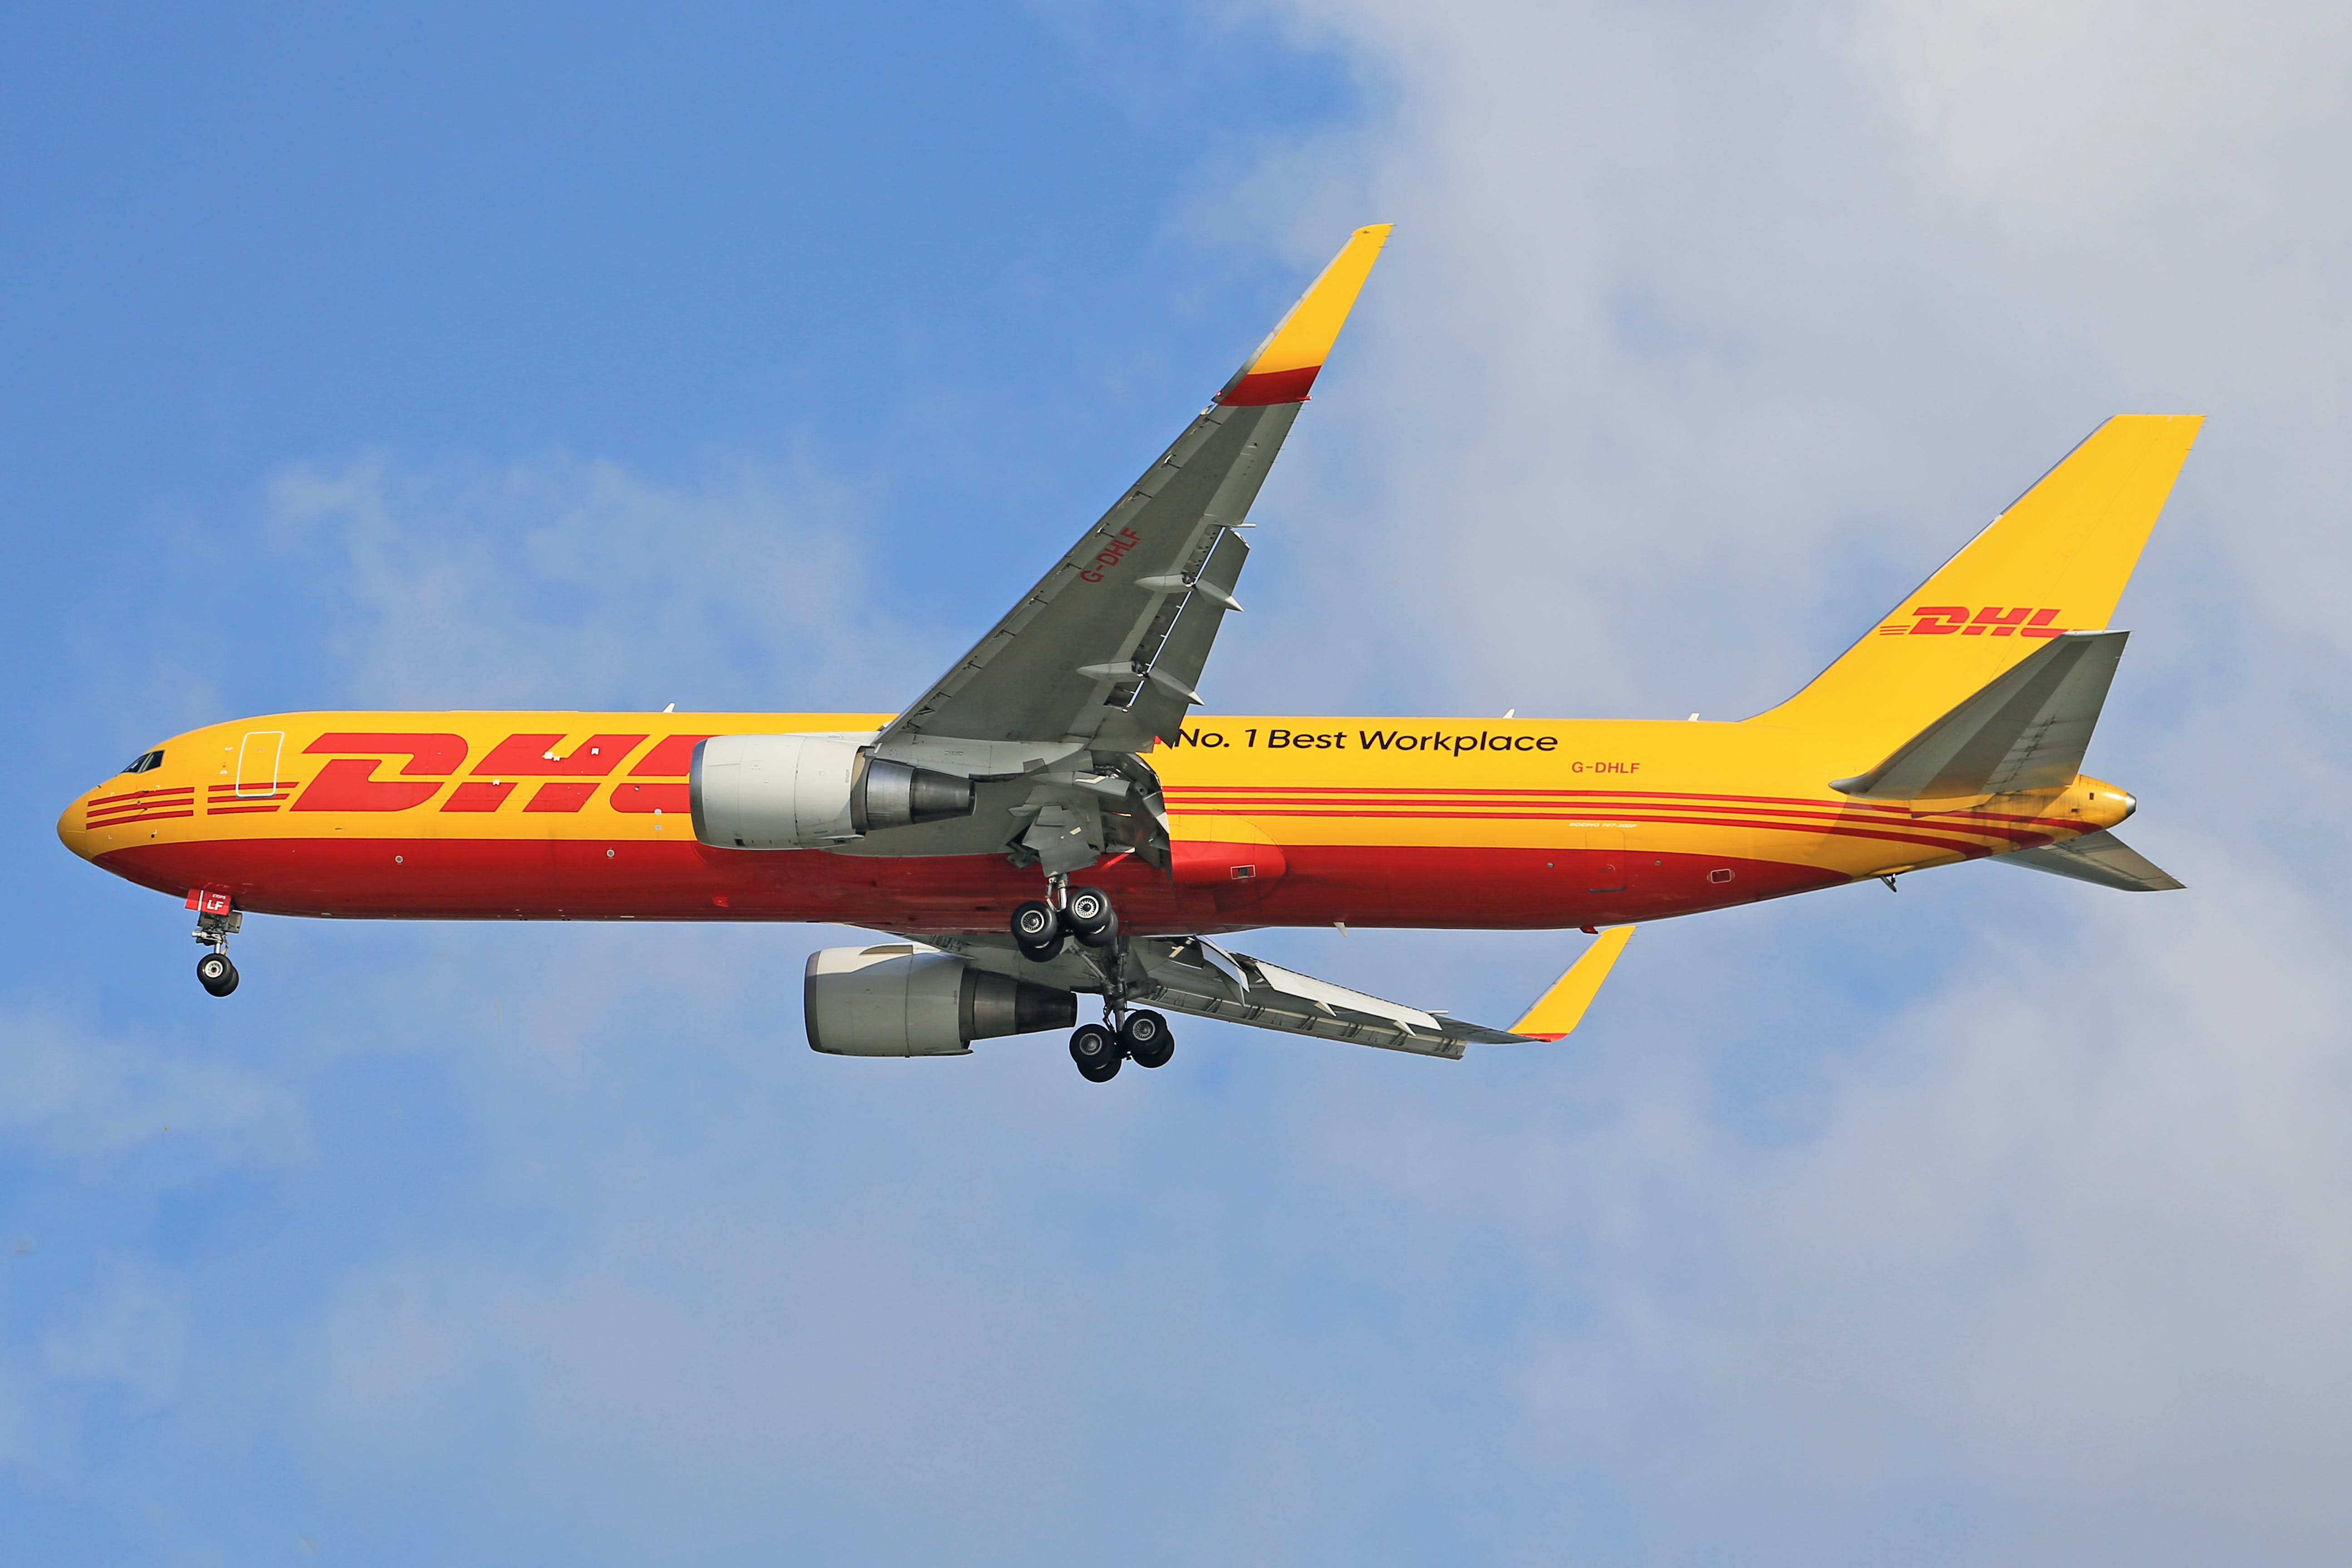 DHL Express goods restrictions starting from 1st of January 2021